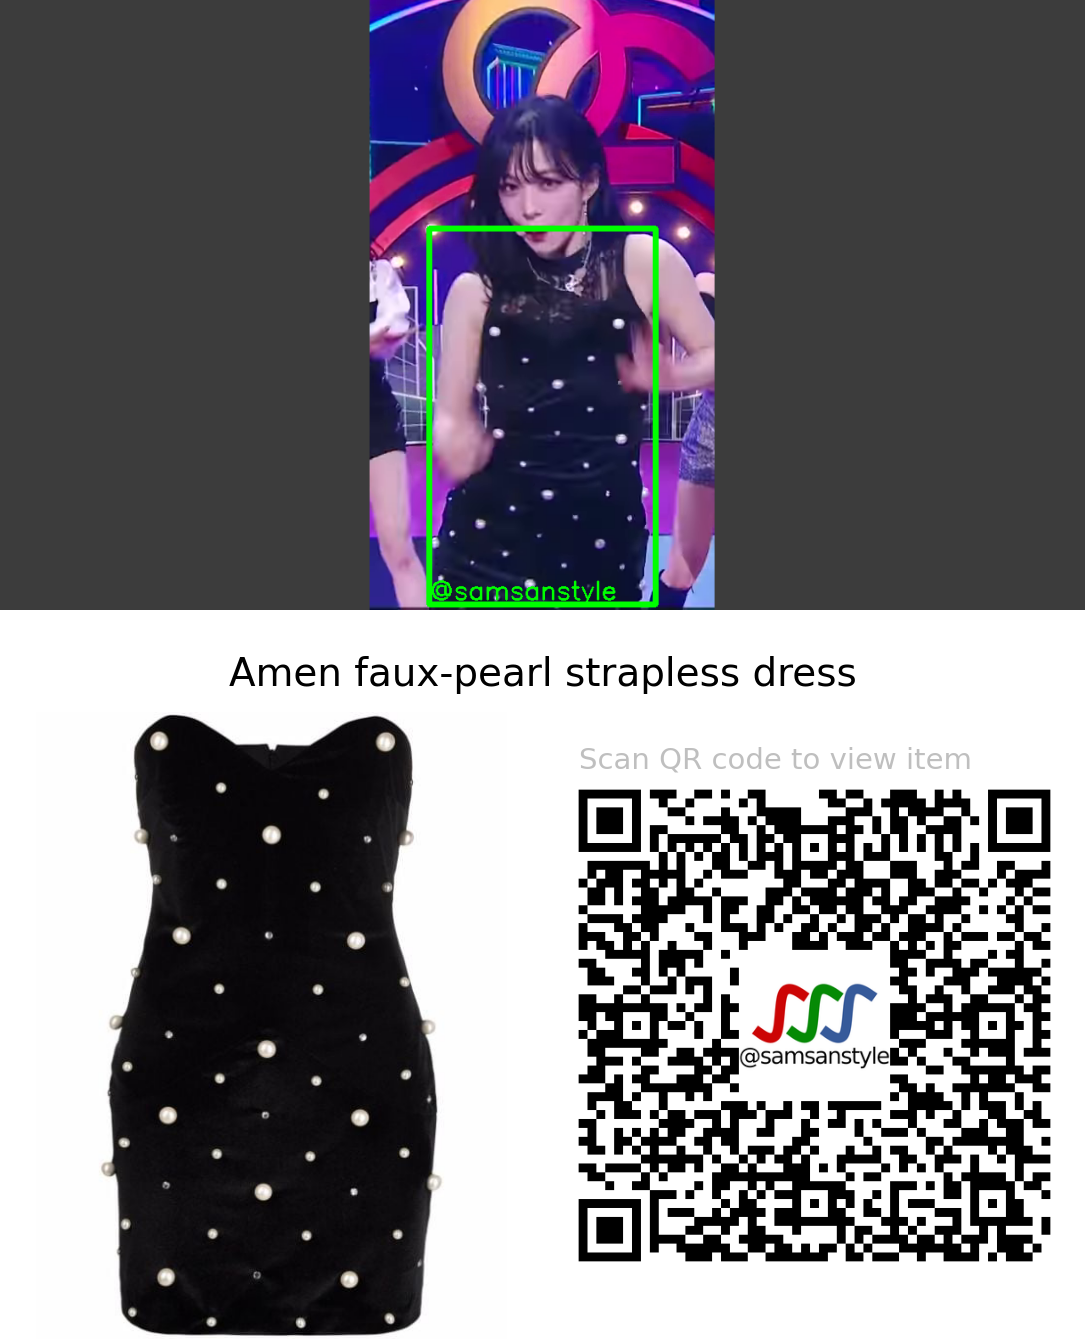 fromis_9 Lee Chaeyoung | DM KBS Music Bank | Amen faux-pearl strapless dress